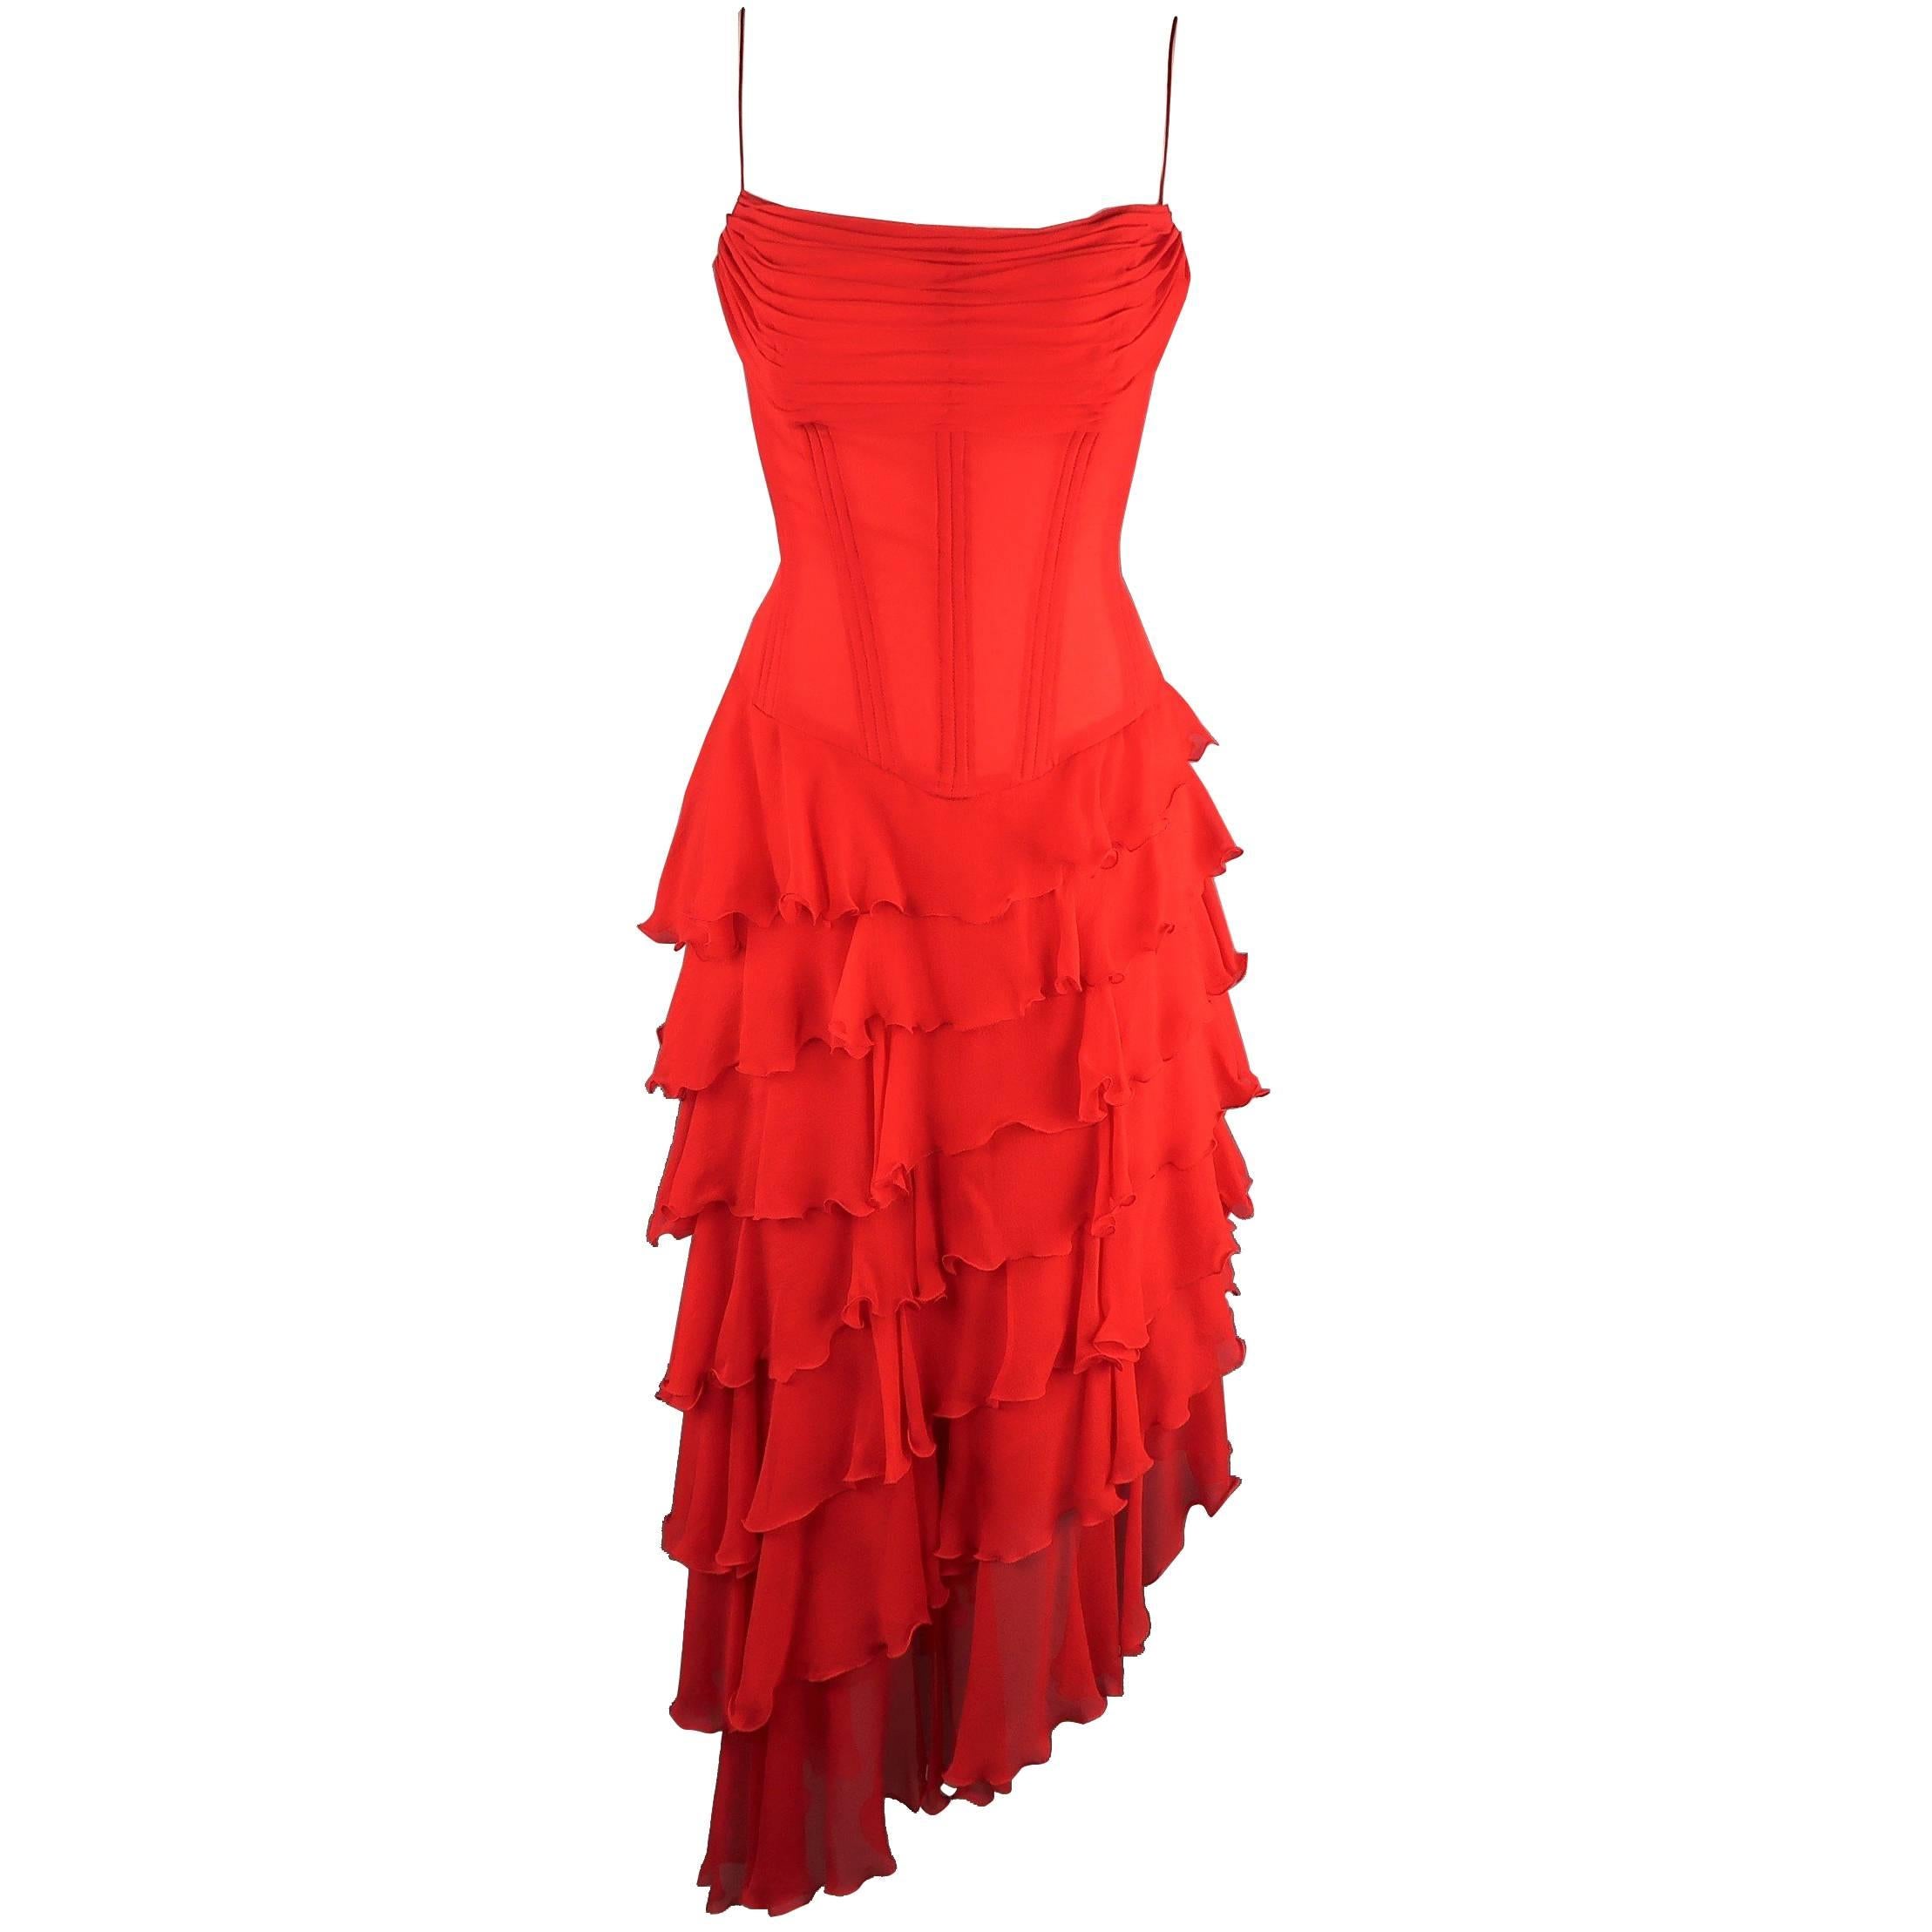 Vicky Tiel Couture Dress - Red Silk Chiffon Asymmetrical Ruffle Corset Cocktail